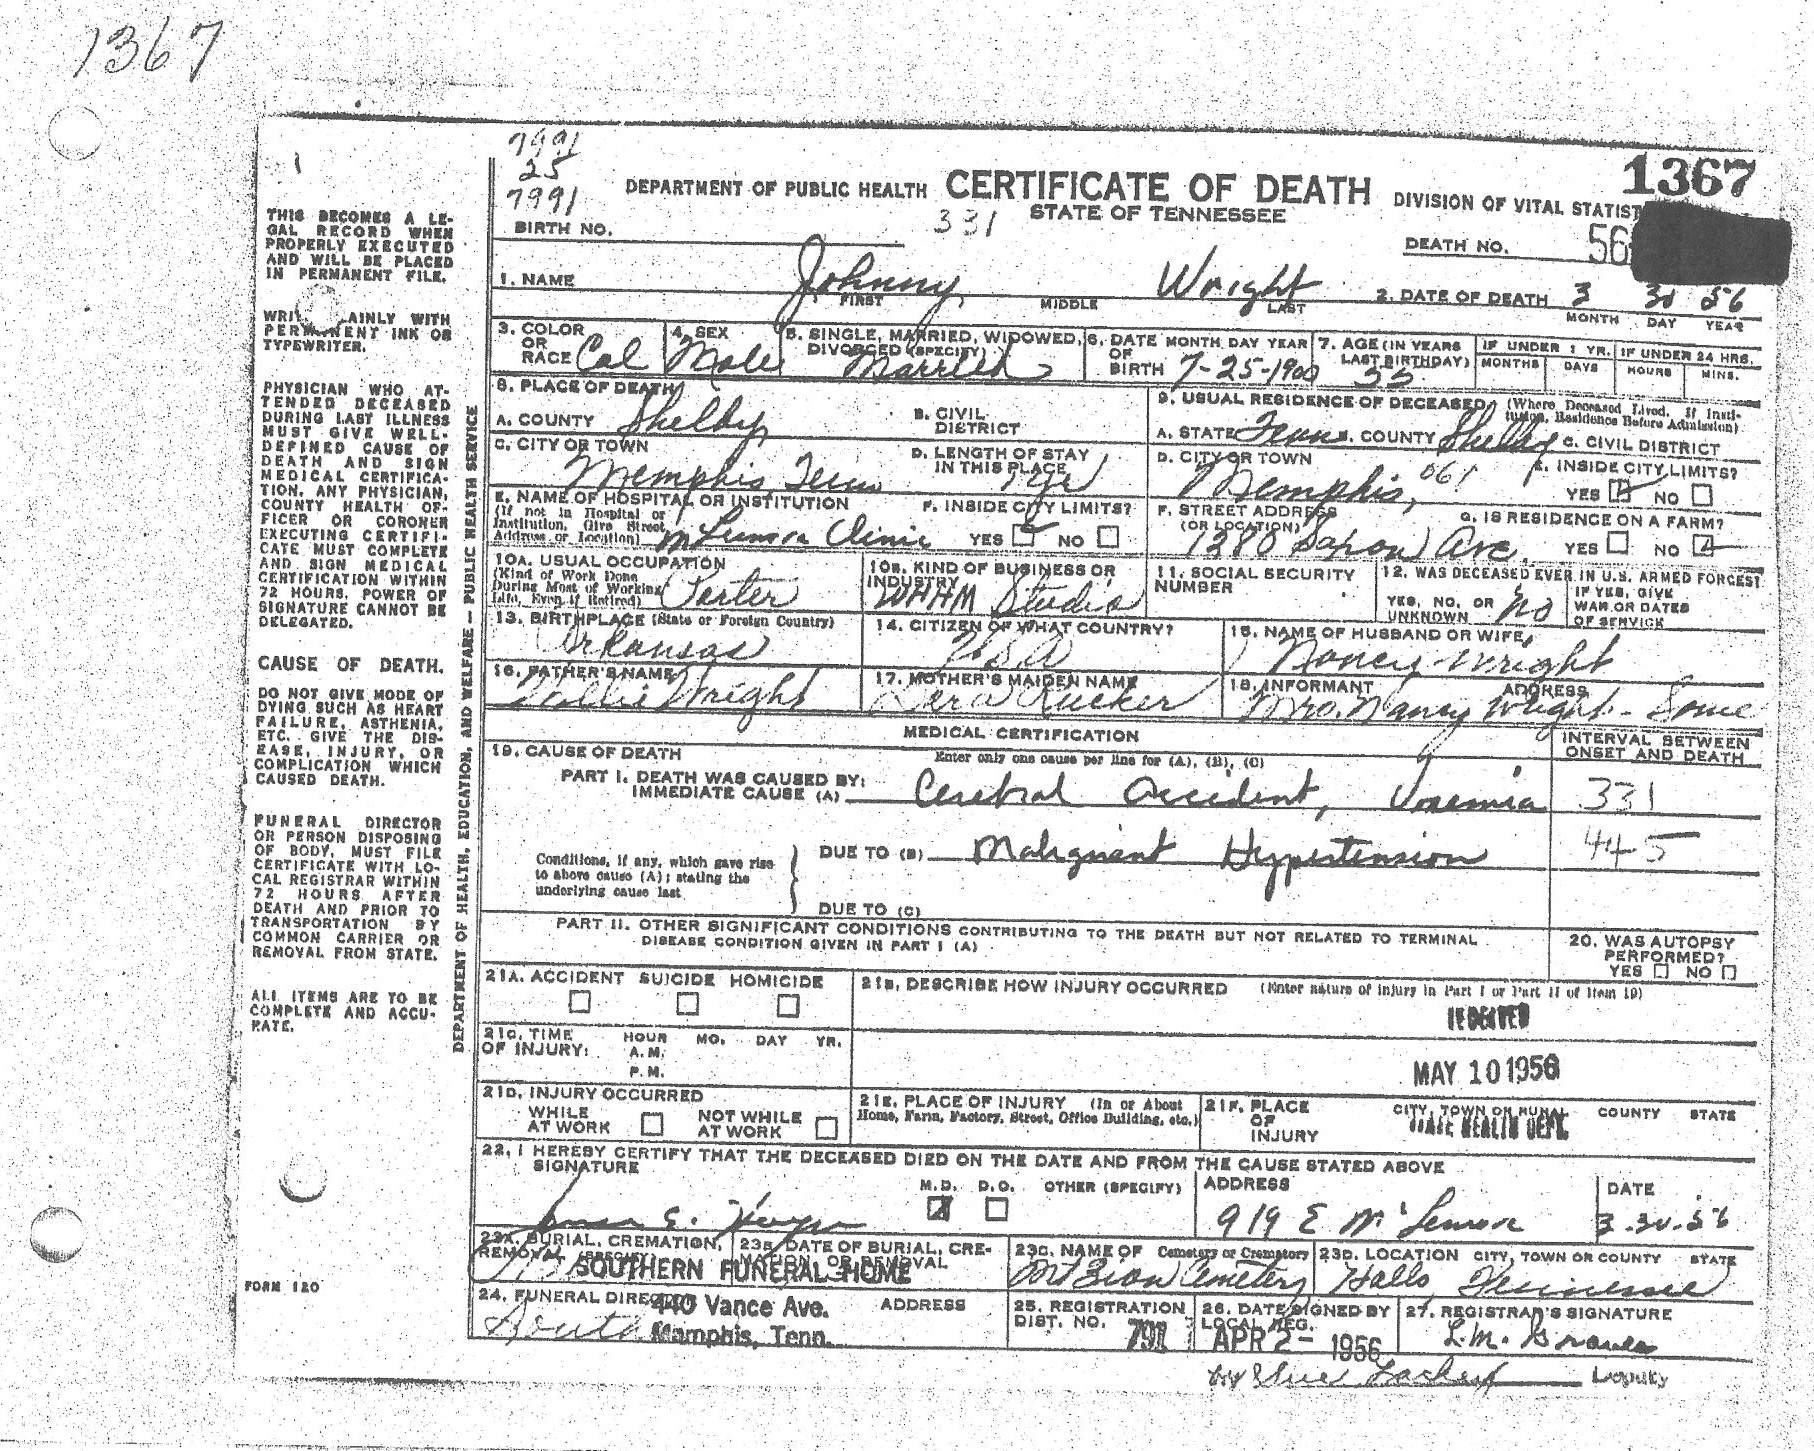 Johnny Wright's Death Certificate